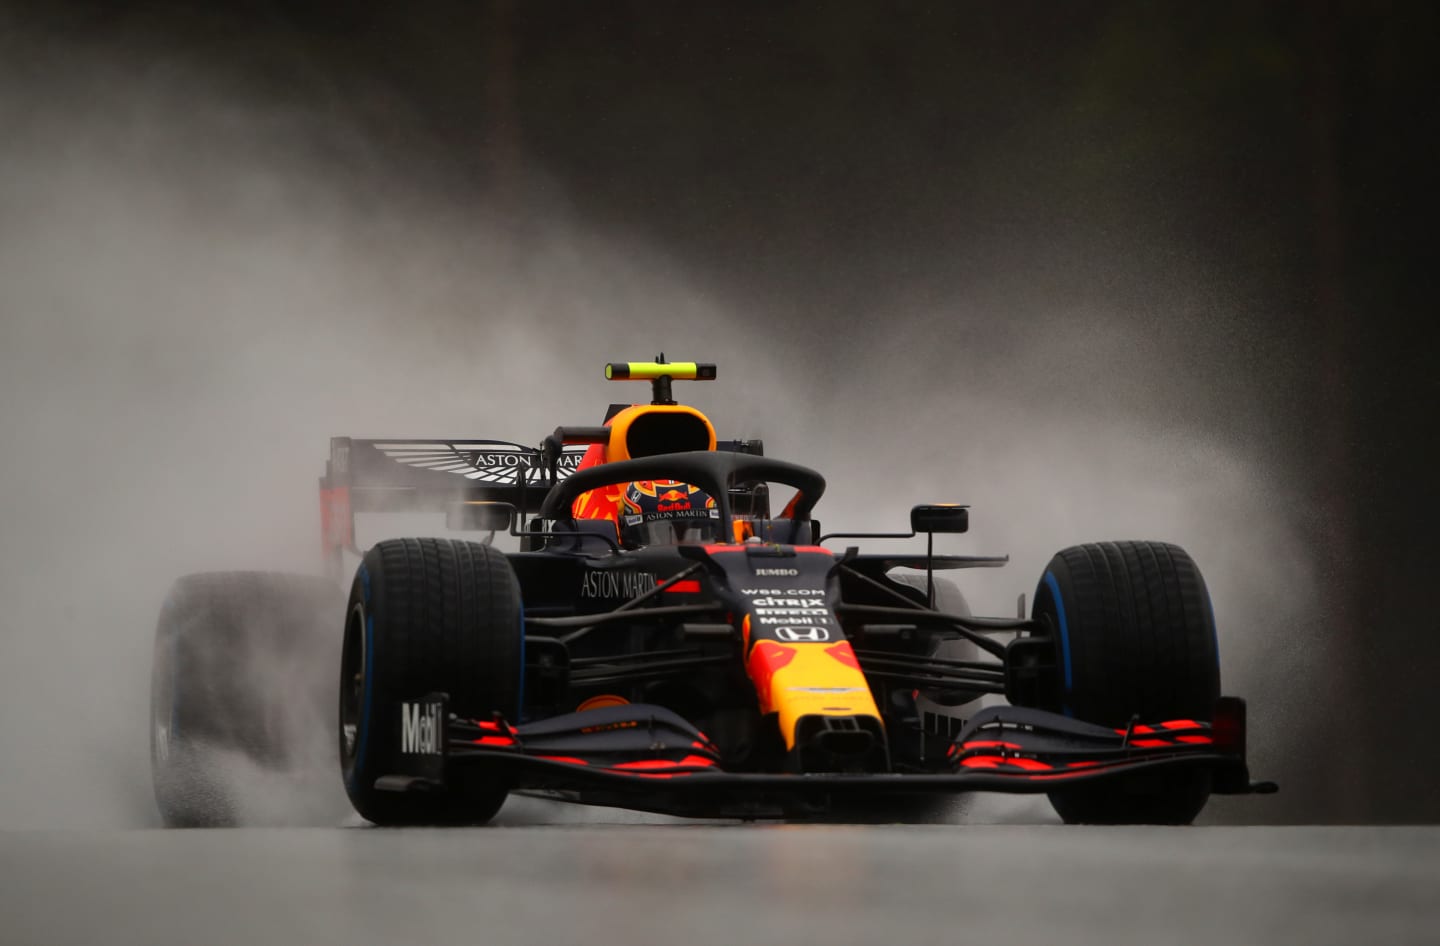 SPIELBERG, AUSTRIA - JULY 11: Alexander Albon of Thailand driving the (23) Aston Martin Red Bull Racing RB16 on track  during qualifying for the Formula One Grand Prix of Styria at Red Bull Ring on July 11, 2020 in Spielberg, Austria. (Photo by Bryn Lennon/Getty Images)